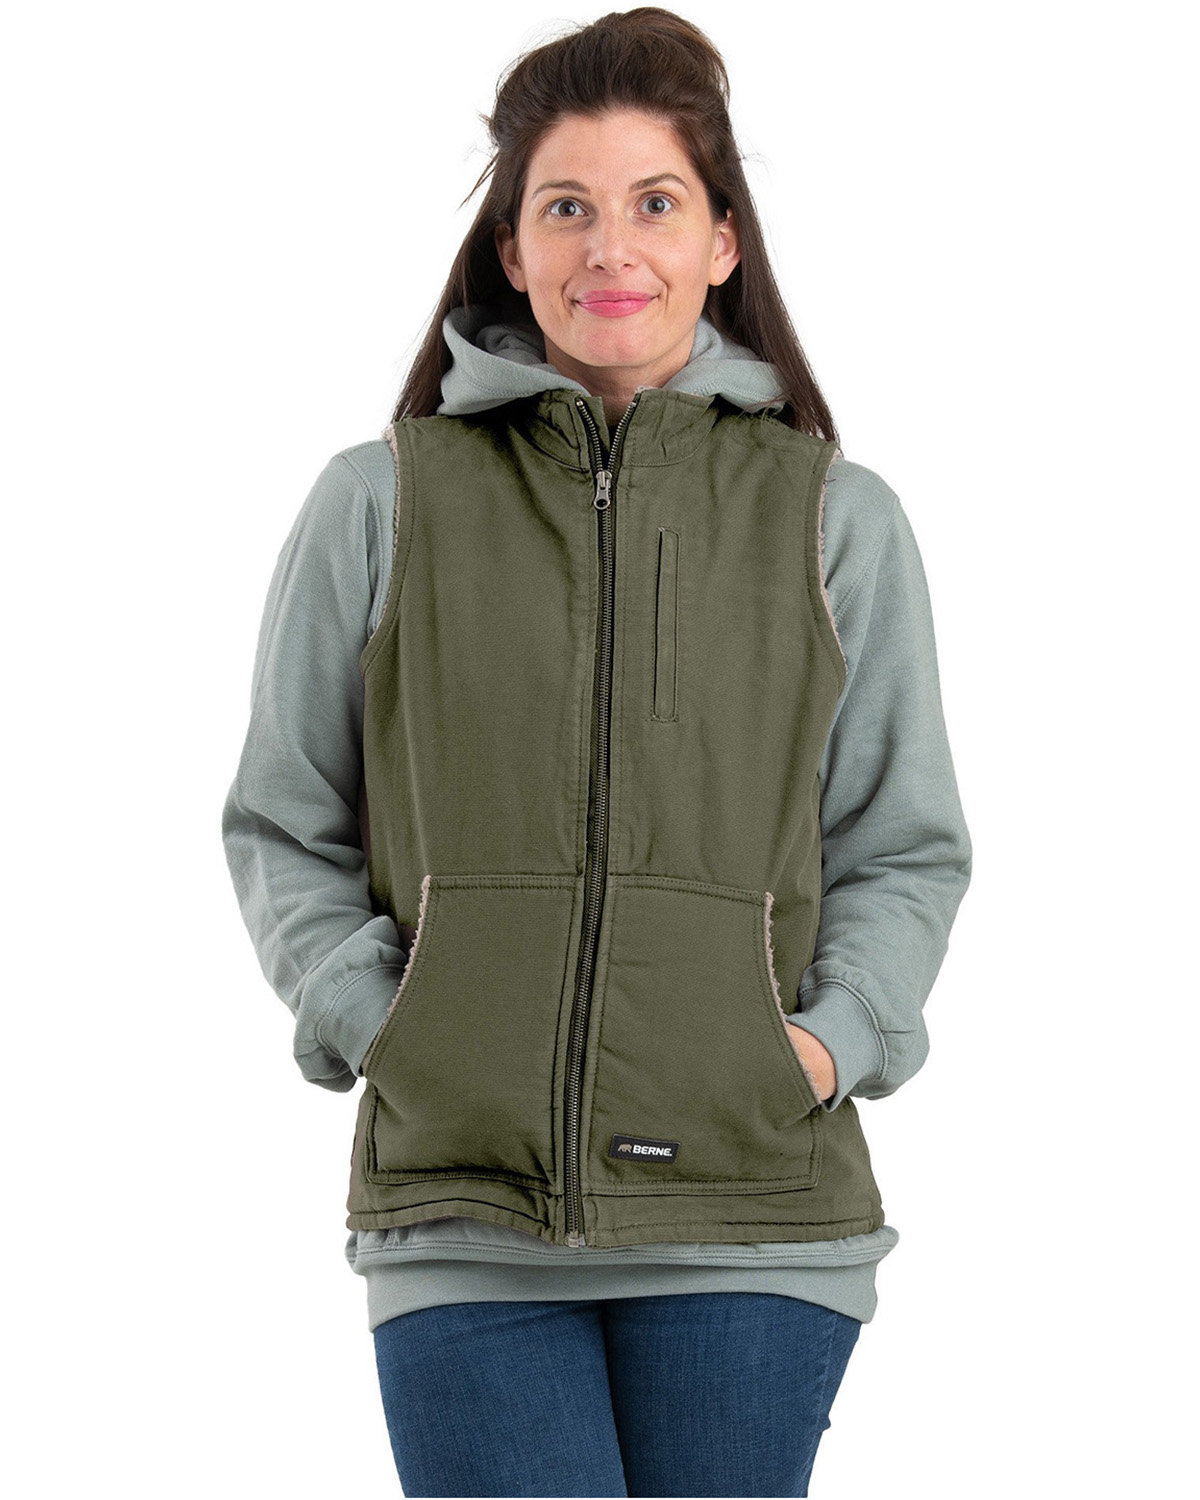 Ladies Sherpa-Lined Softstone Duck Vest-Berne